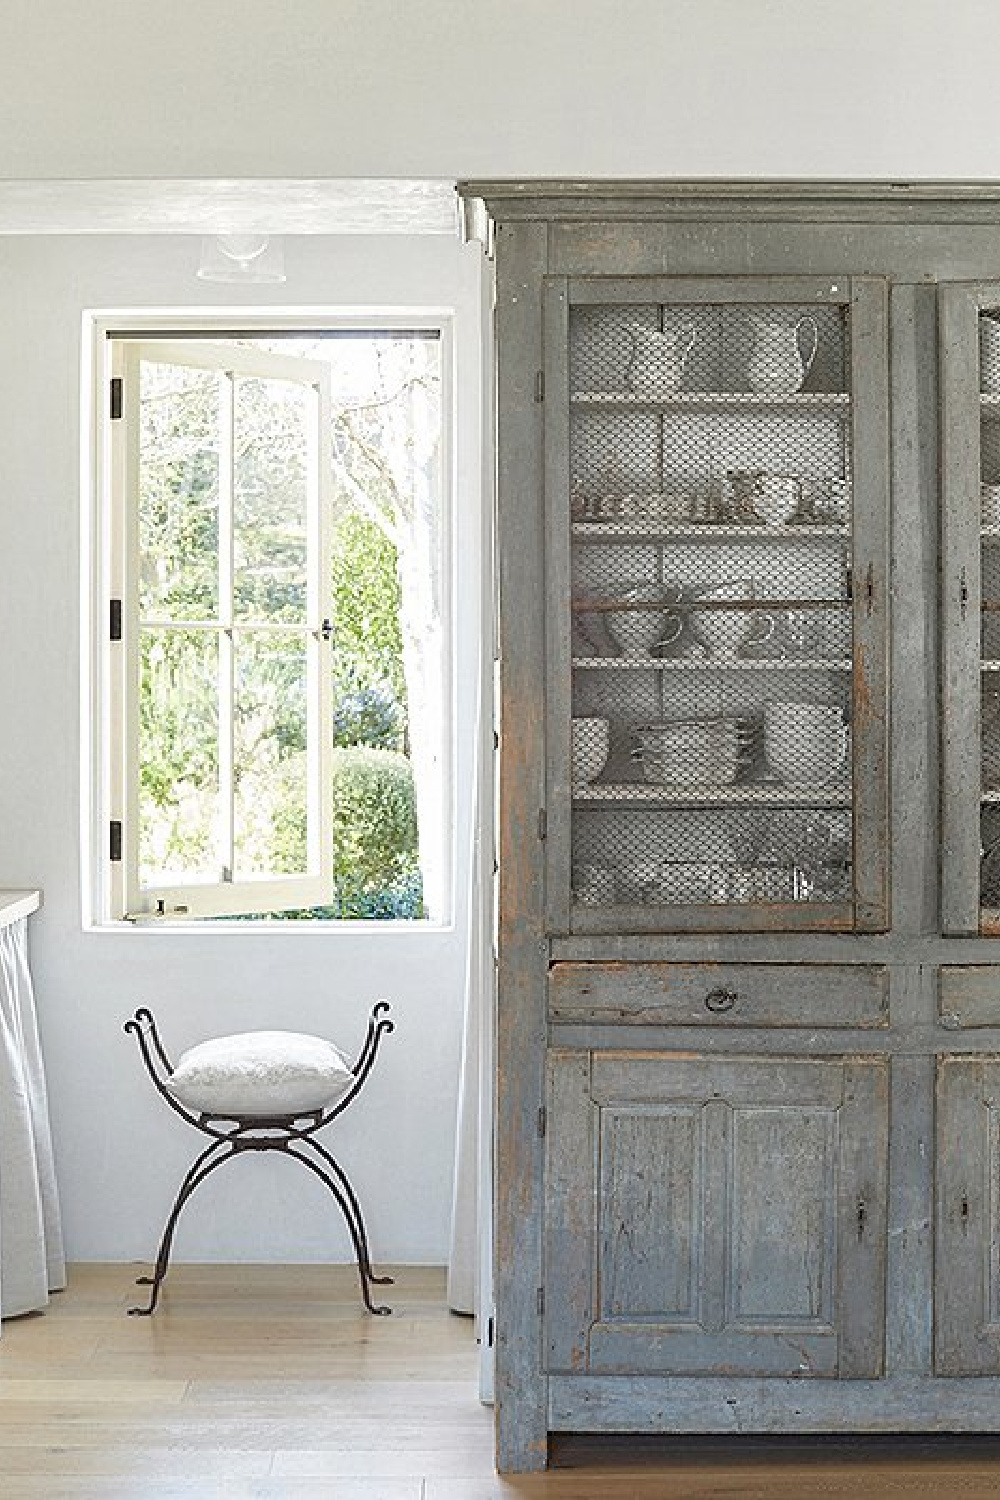 Antique French cupboard holding dishes in kitchen - Patina Farm (Brooke Giannetti) European country farmhouse in Ojai. #patinafarm #vintagemodern #modernrustic #frenchkitchens